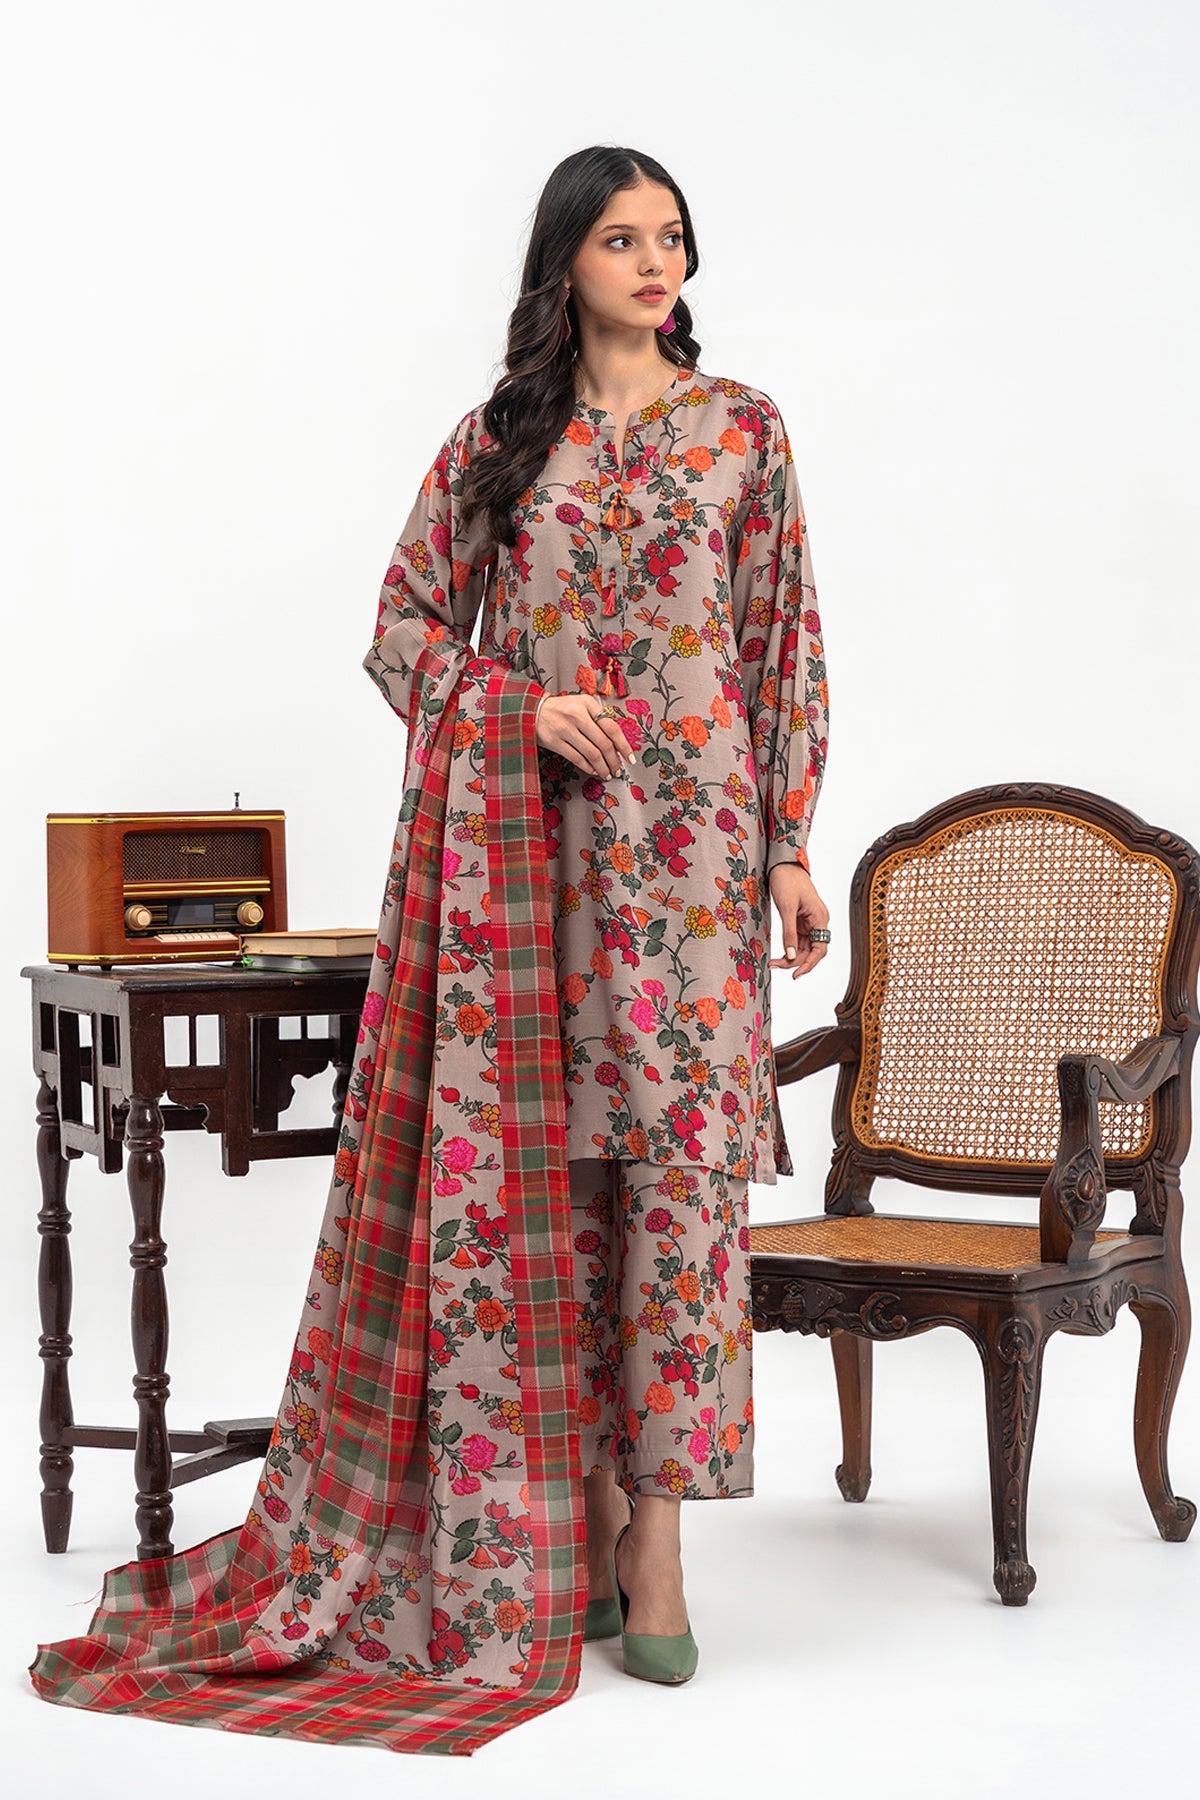 3-PC Printed  Staple Shirt with Staple Dupatta and Trouser CPM-3-263